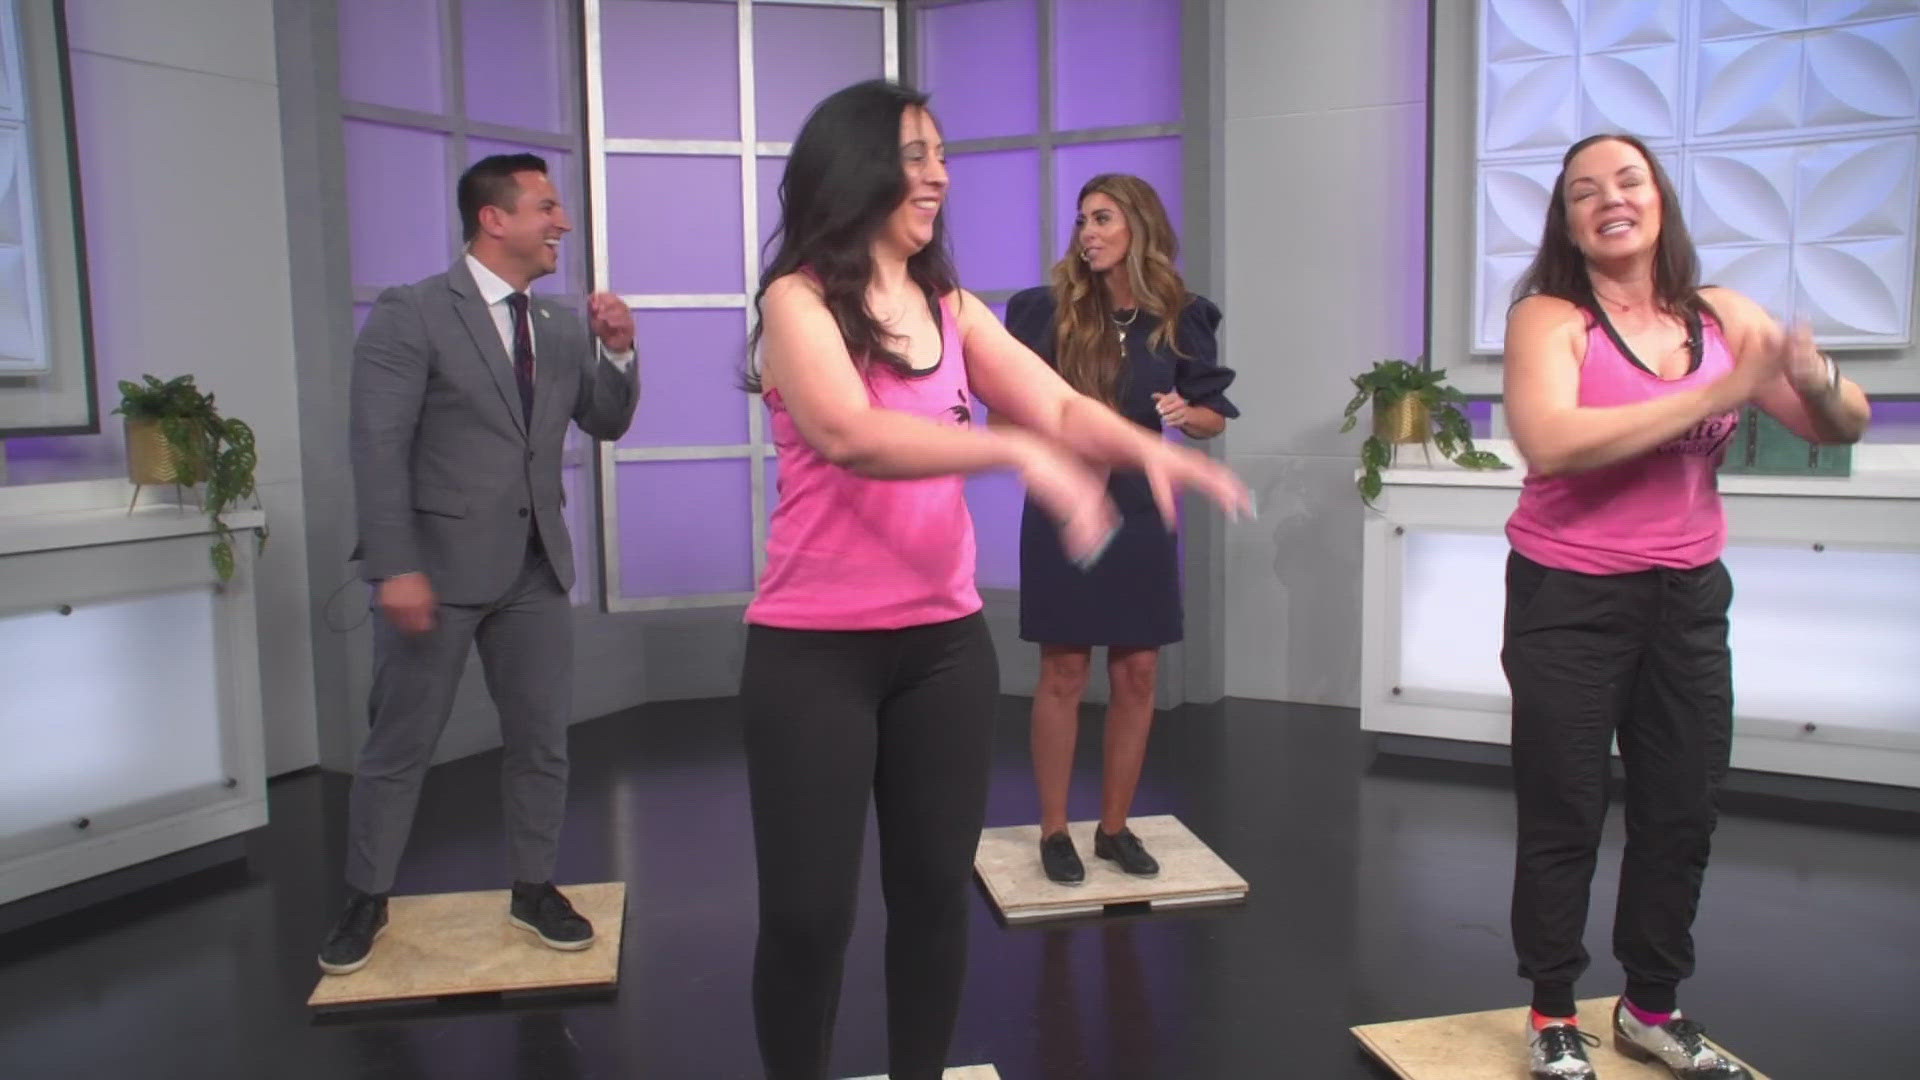 Janelle and Dena with Elevate Dance Center share some tap dance moves in celebration of International Dance Day.